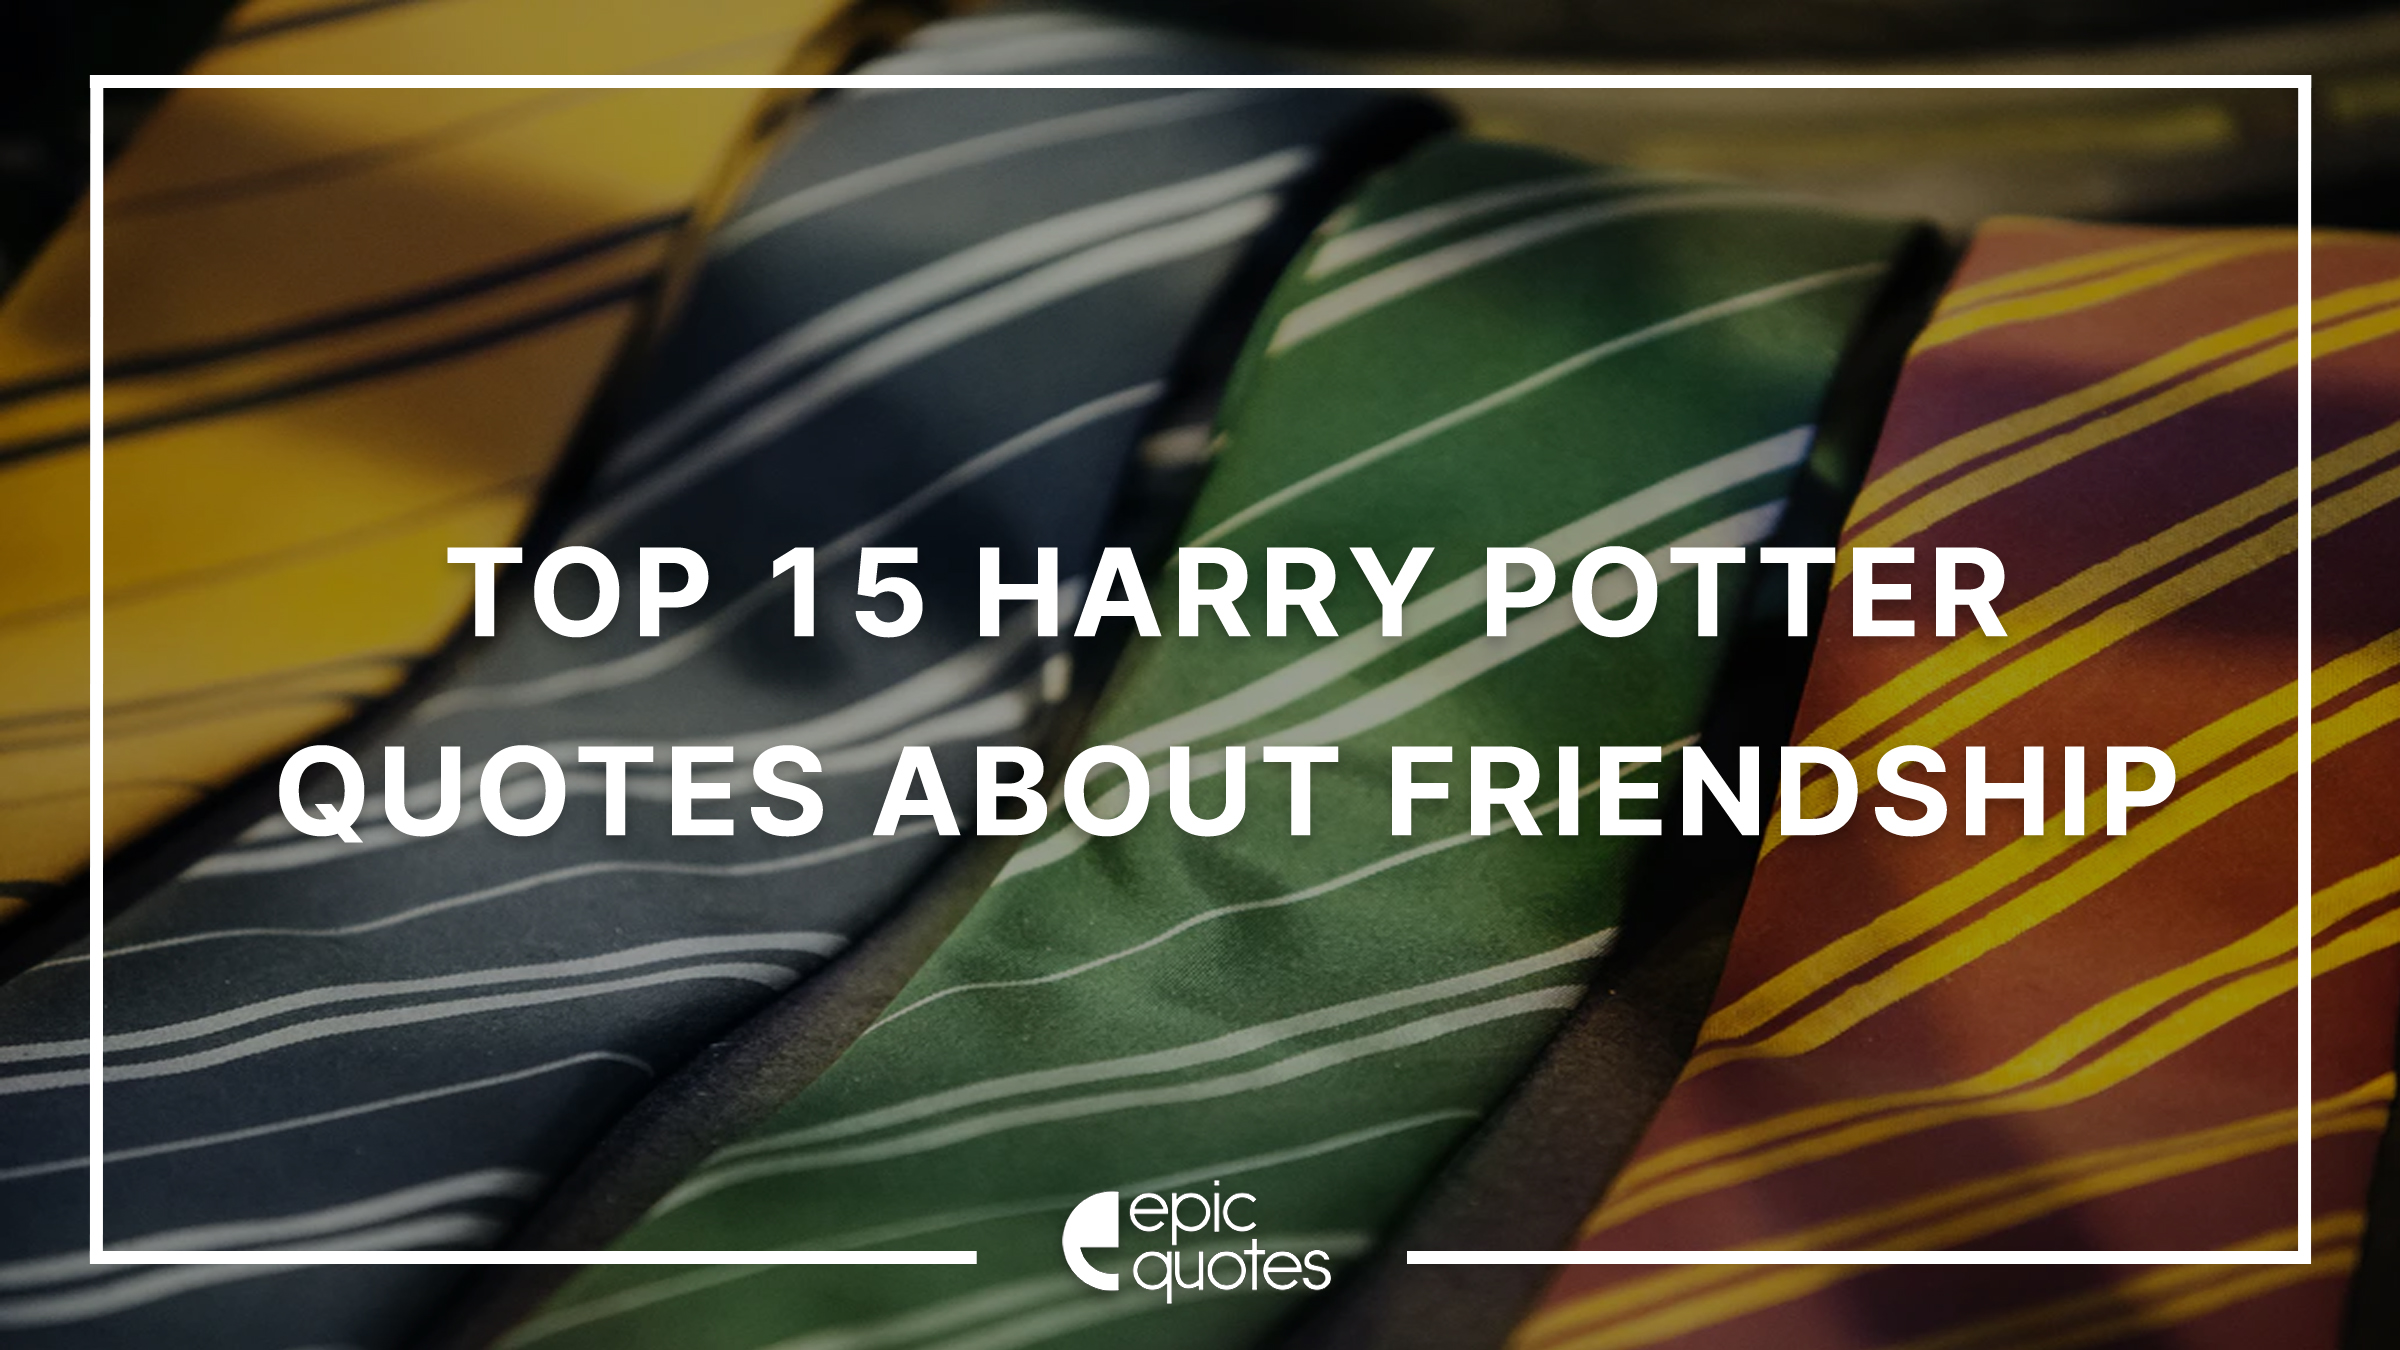 Top 15 Harry Potter Quotes About Friendship | Epic Quotes